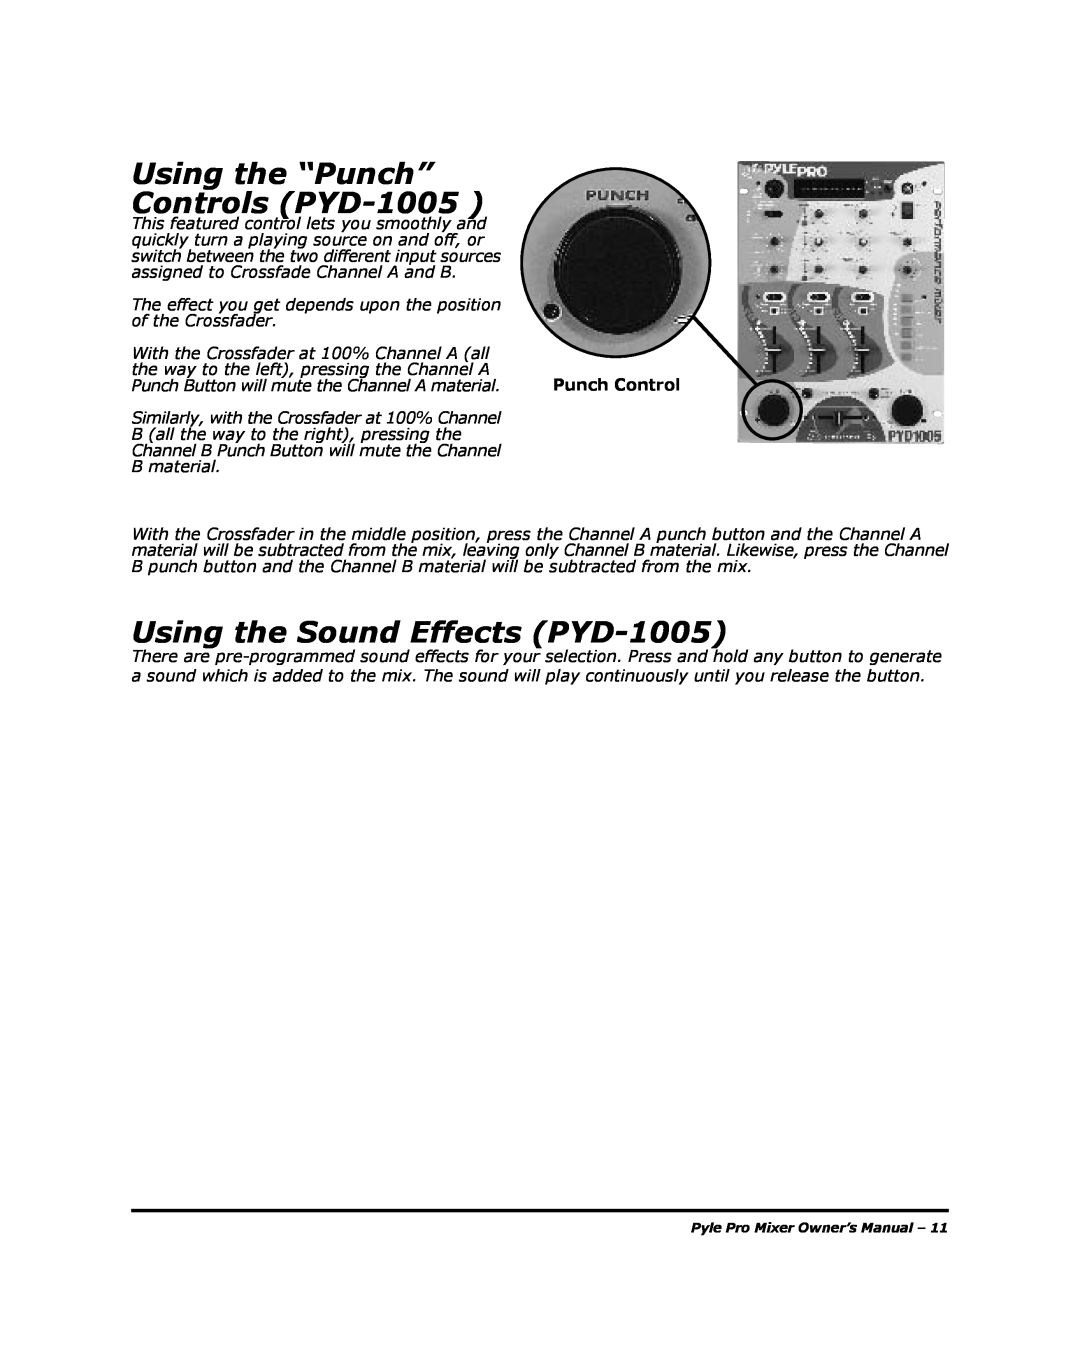 PYLE Audio PYD-1002 manual Using the “Punch” Controls PYD-1005, Using the Sound Effects PYD-1005, Punch Control 